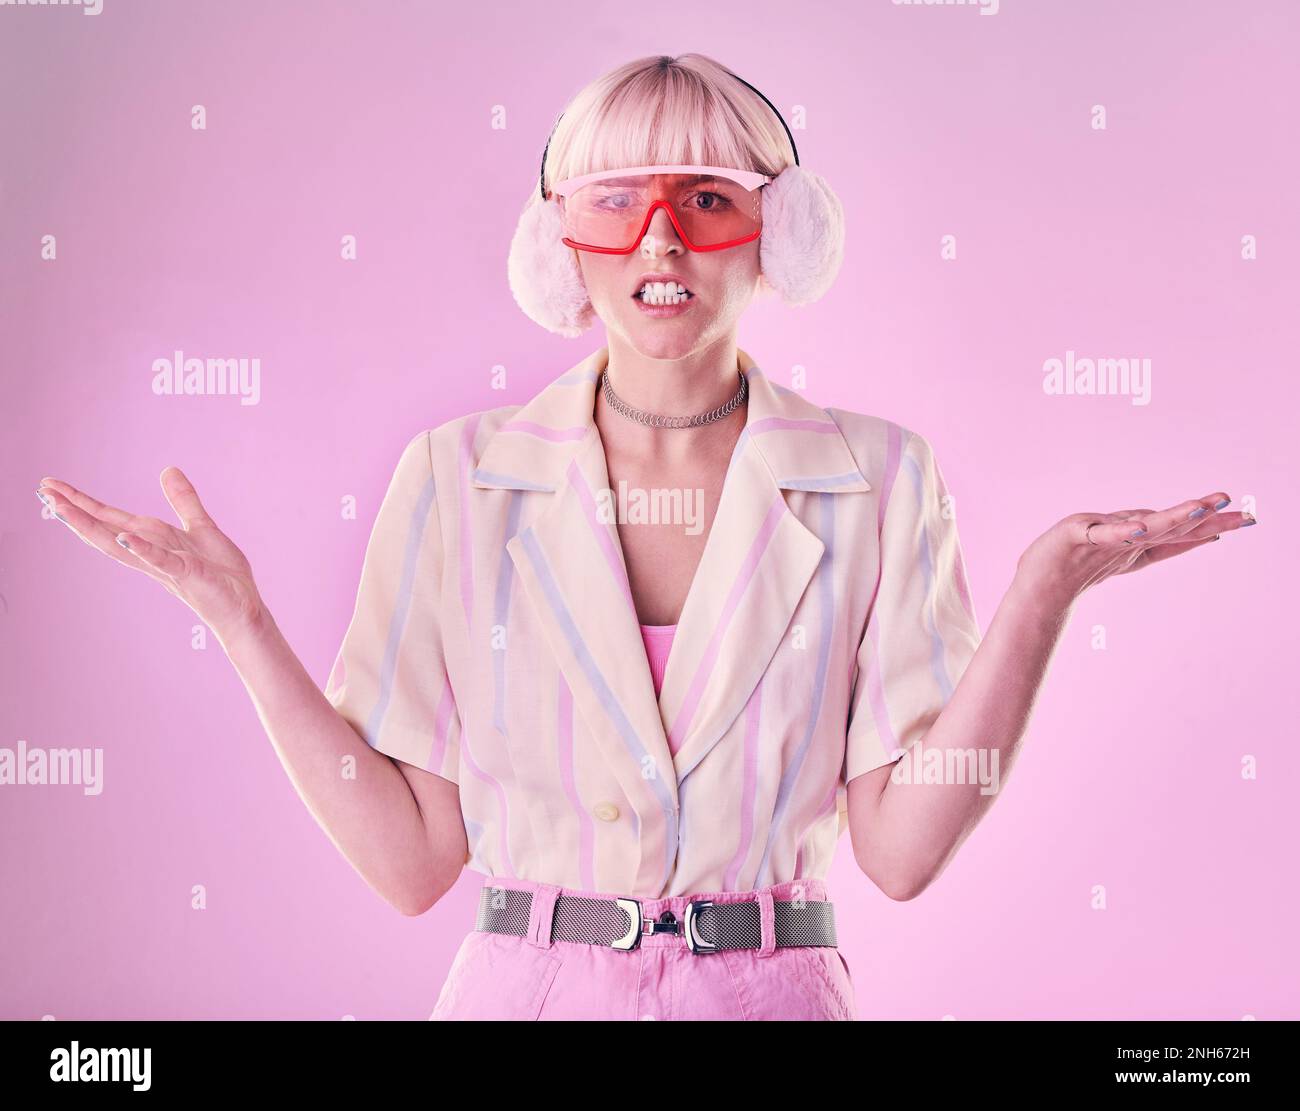 Confused, angry and portrait of a woman with fashion isolated on a pink background in a studio. Anxiety, sad and stylish girl model wearing ear muffs Stock Photo